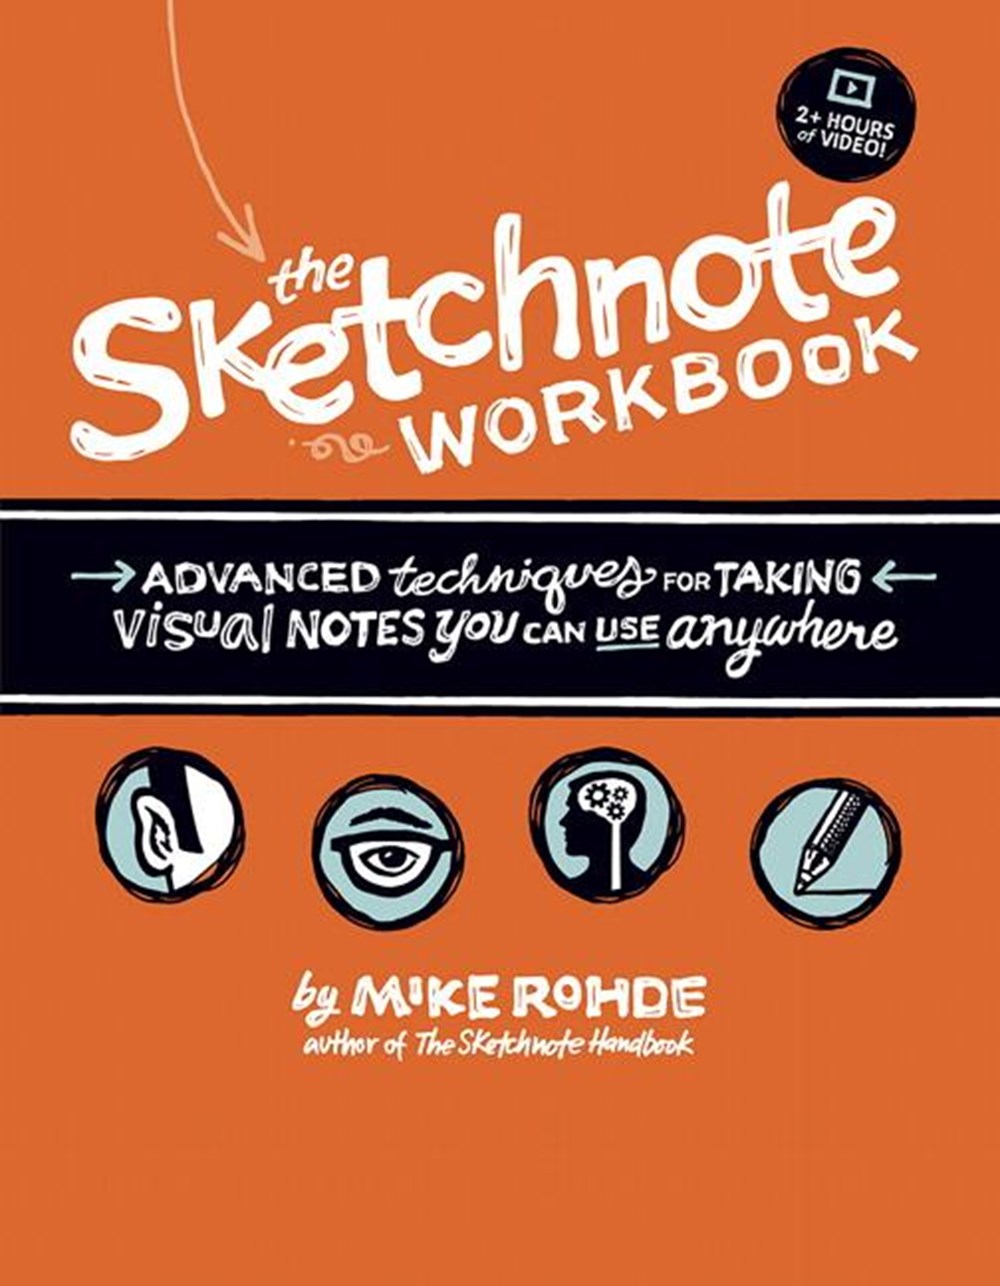 Sketchnote Workbook: Advanced Techniques for Taking Visual Notes You Can Use Anywhere